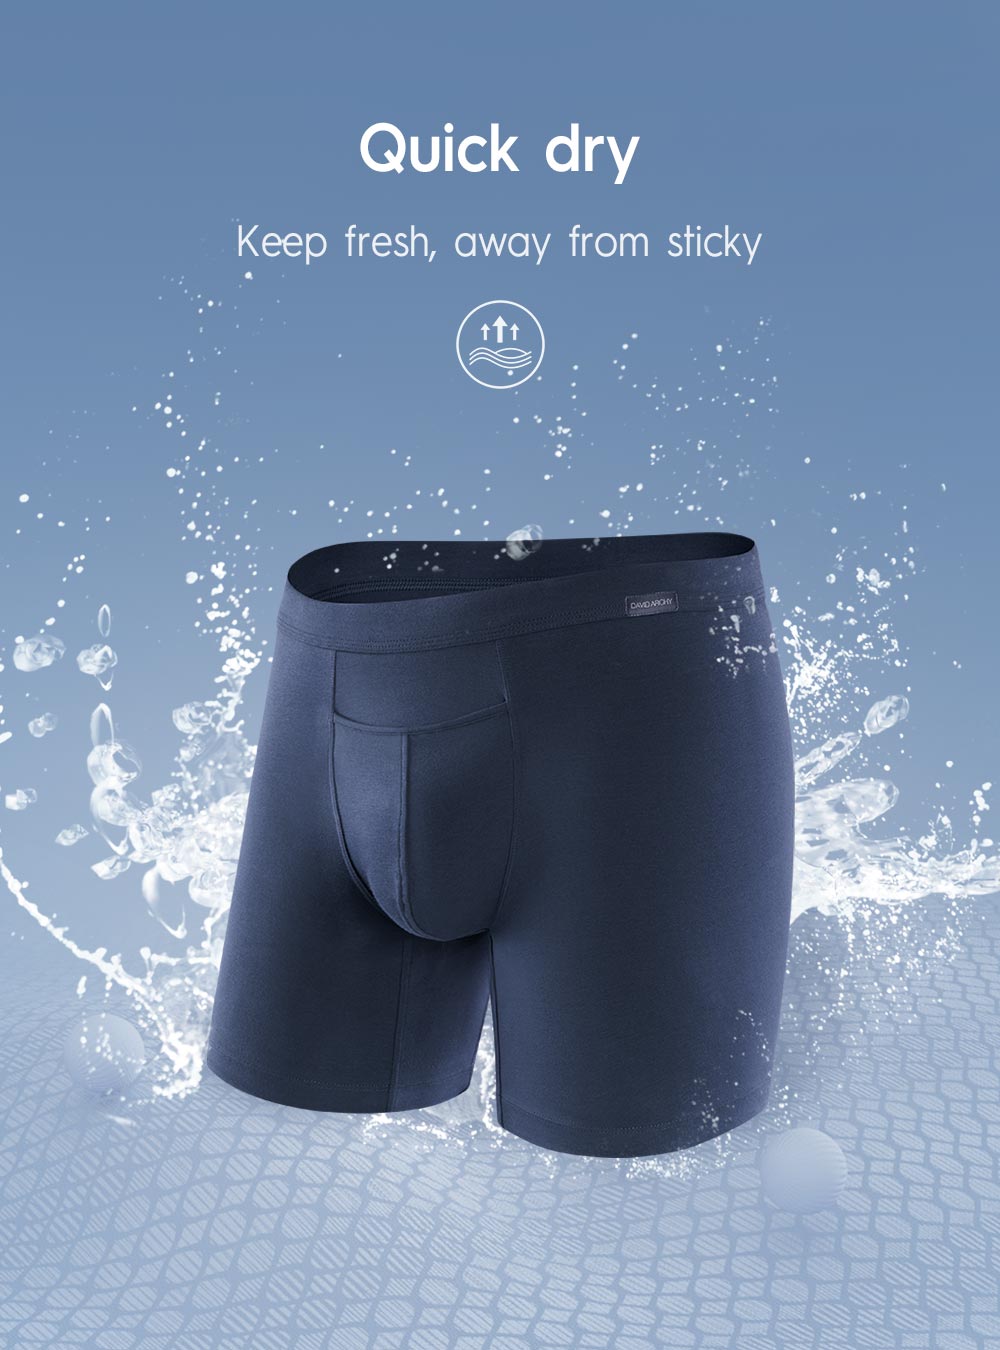 PULL IN Mens 3D Printed Boxer Shorts Sexy Quick Dry Beach Underwear, 100%  Quick Dry Material, French Brand From Qq1959578427, $12.18